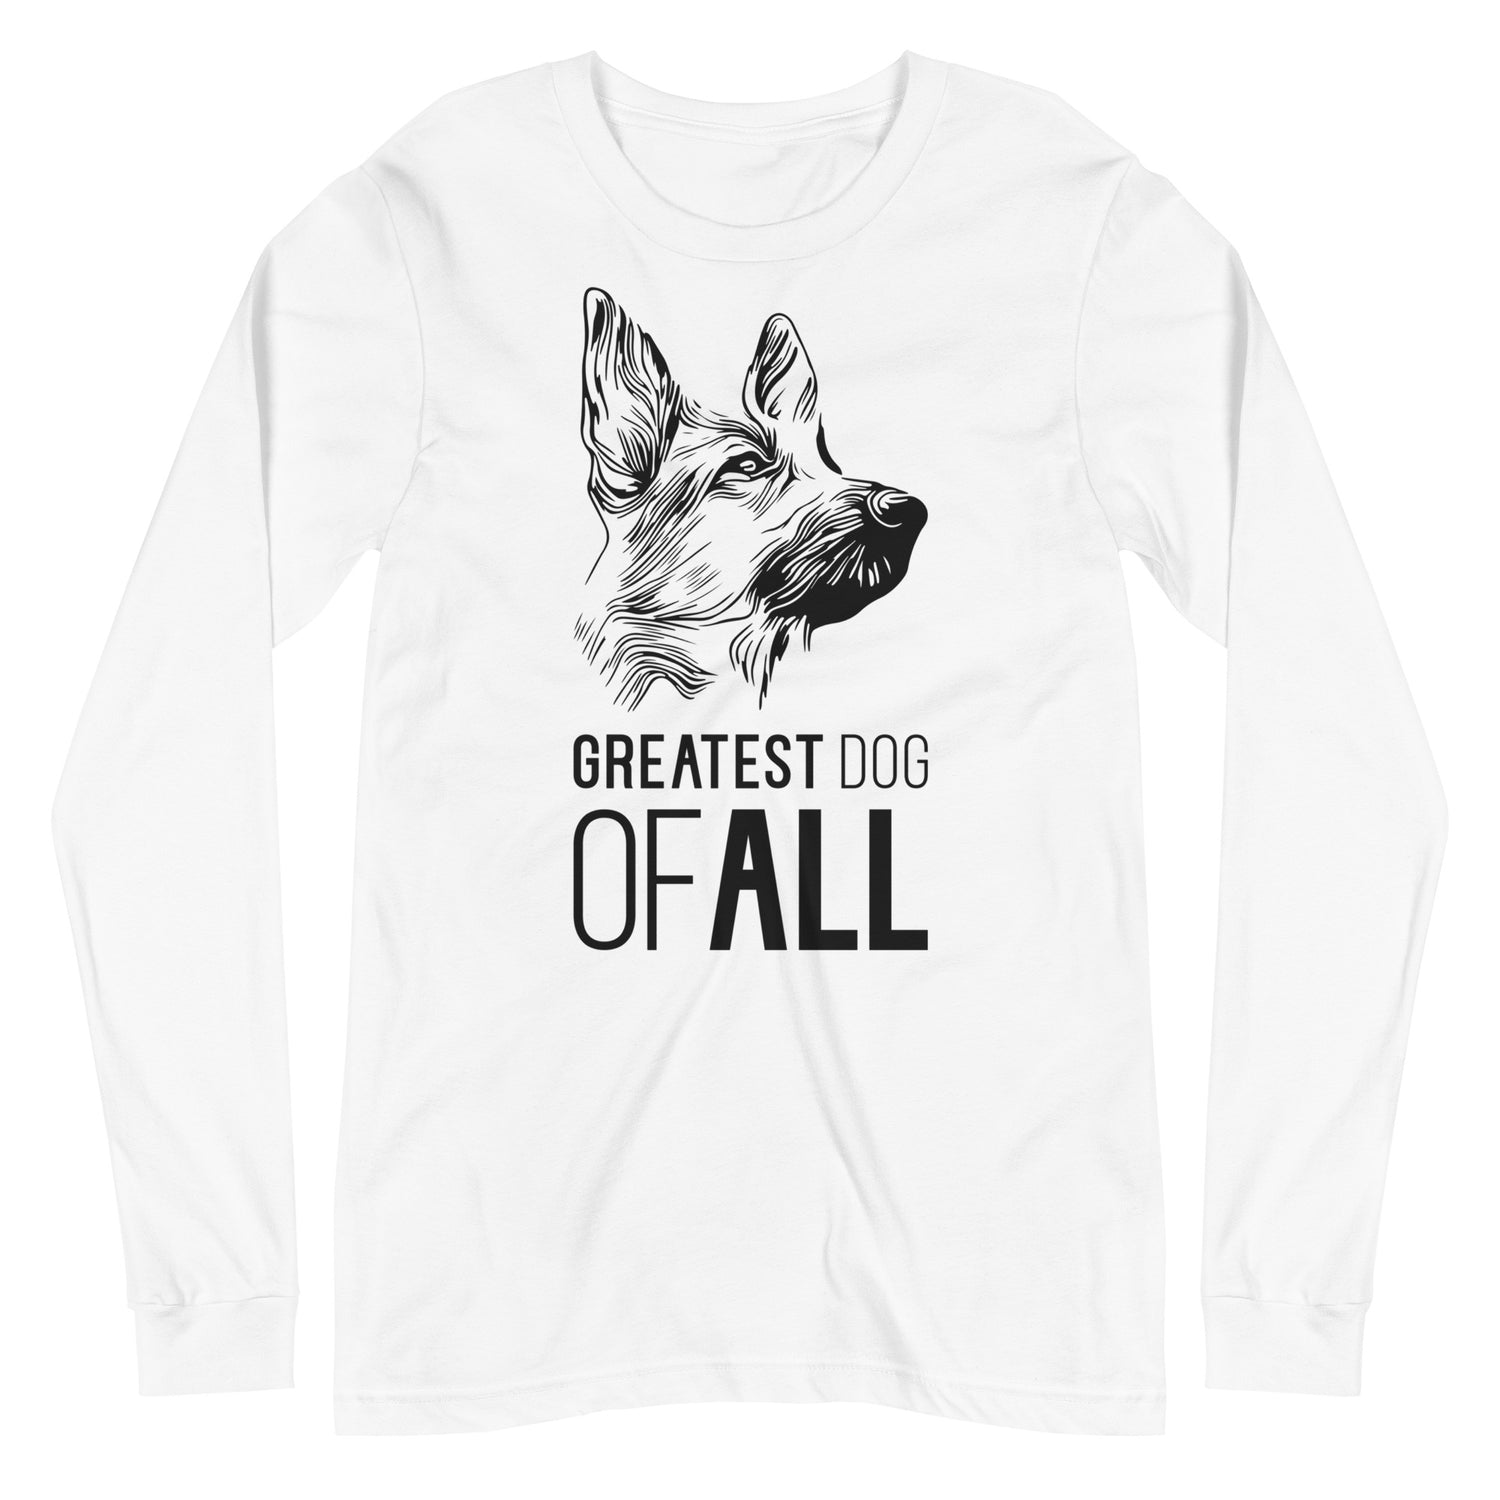 Black German Shepherd face silhouette with Greatest Dog of All caption on unisex white long sleeve t-shirt